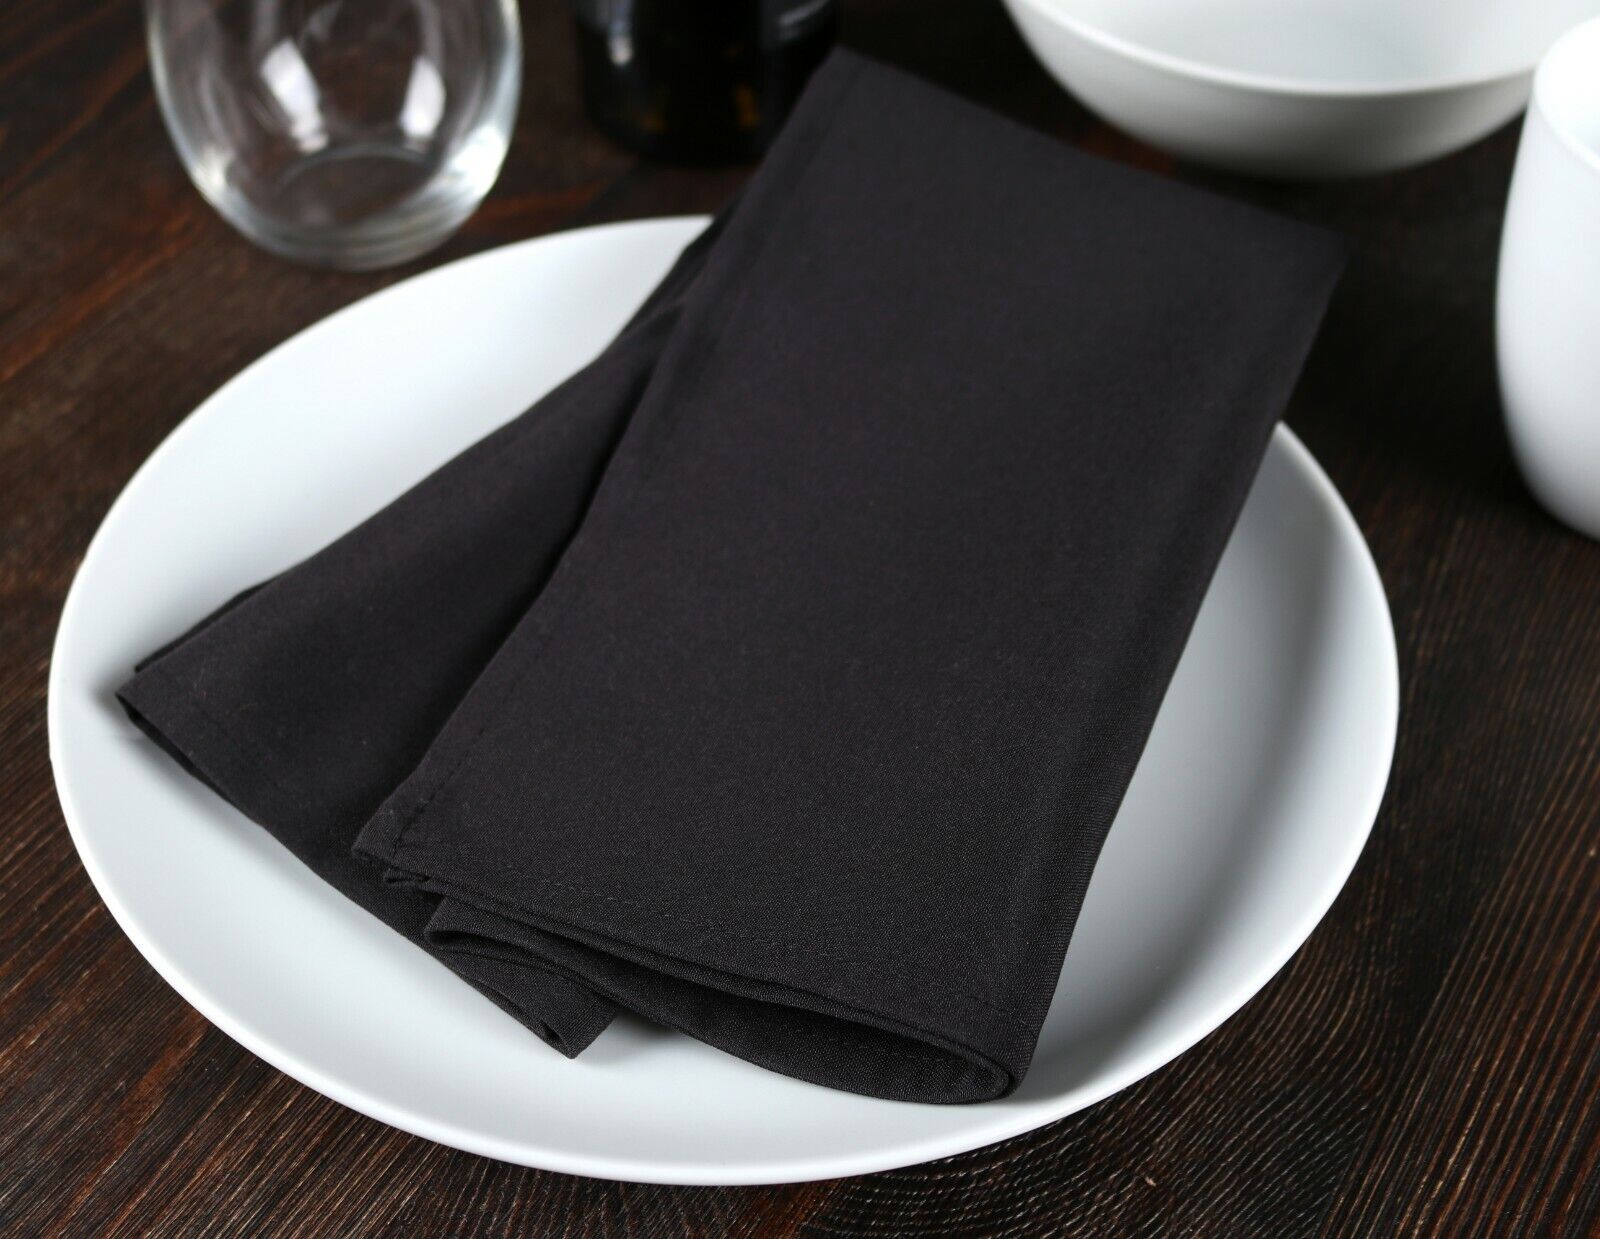 Dinner Napkin 25 Pack - 20 x 20 Poly-Spun Cloth Dining Napkins w/ Color Options Arkwright None - фотография #3